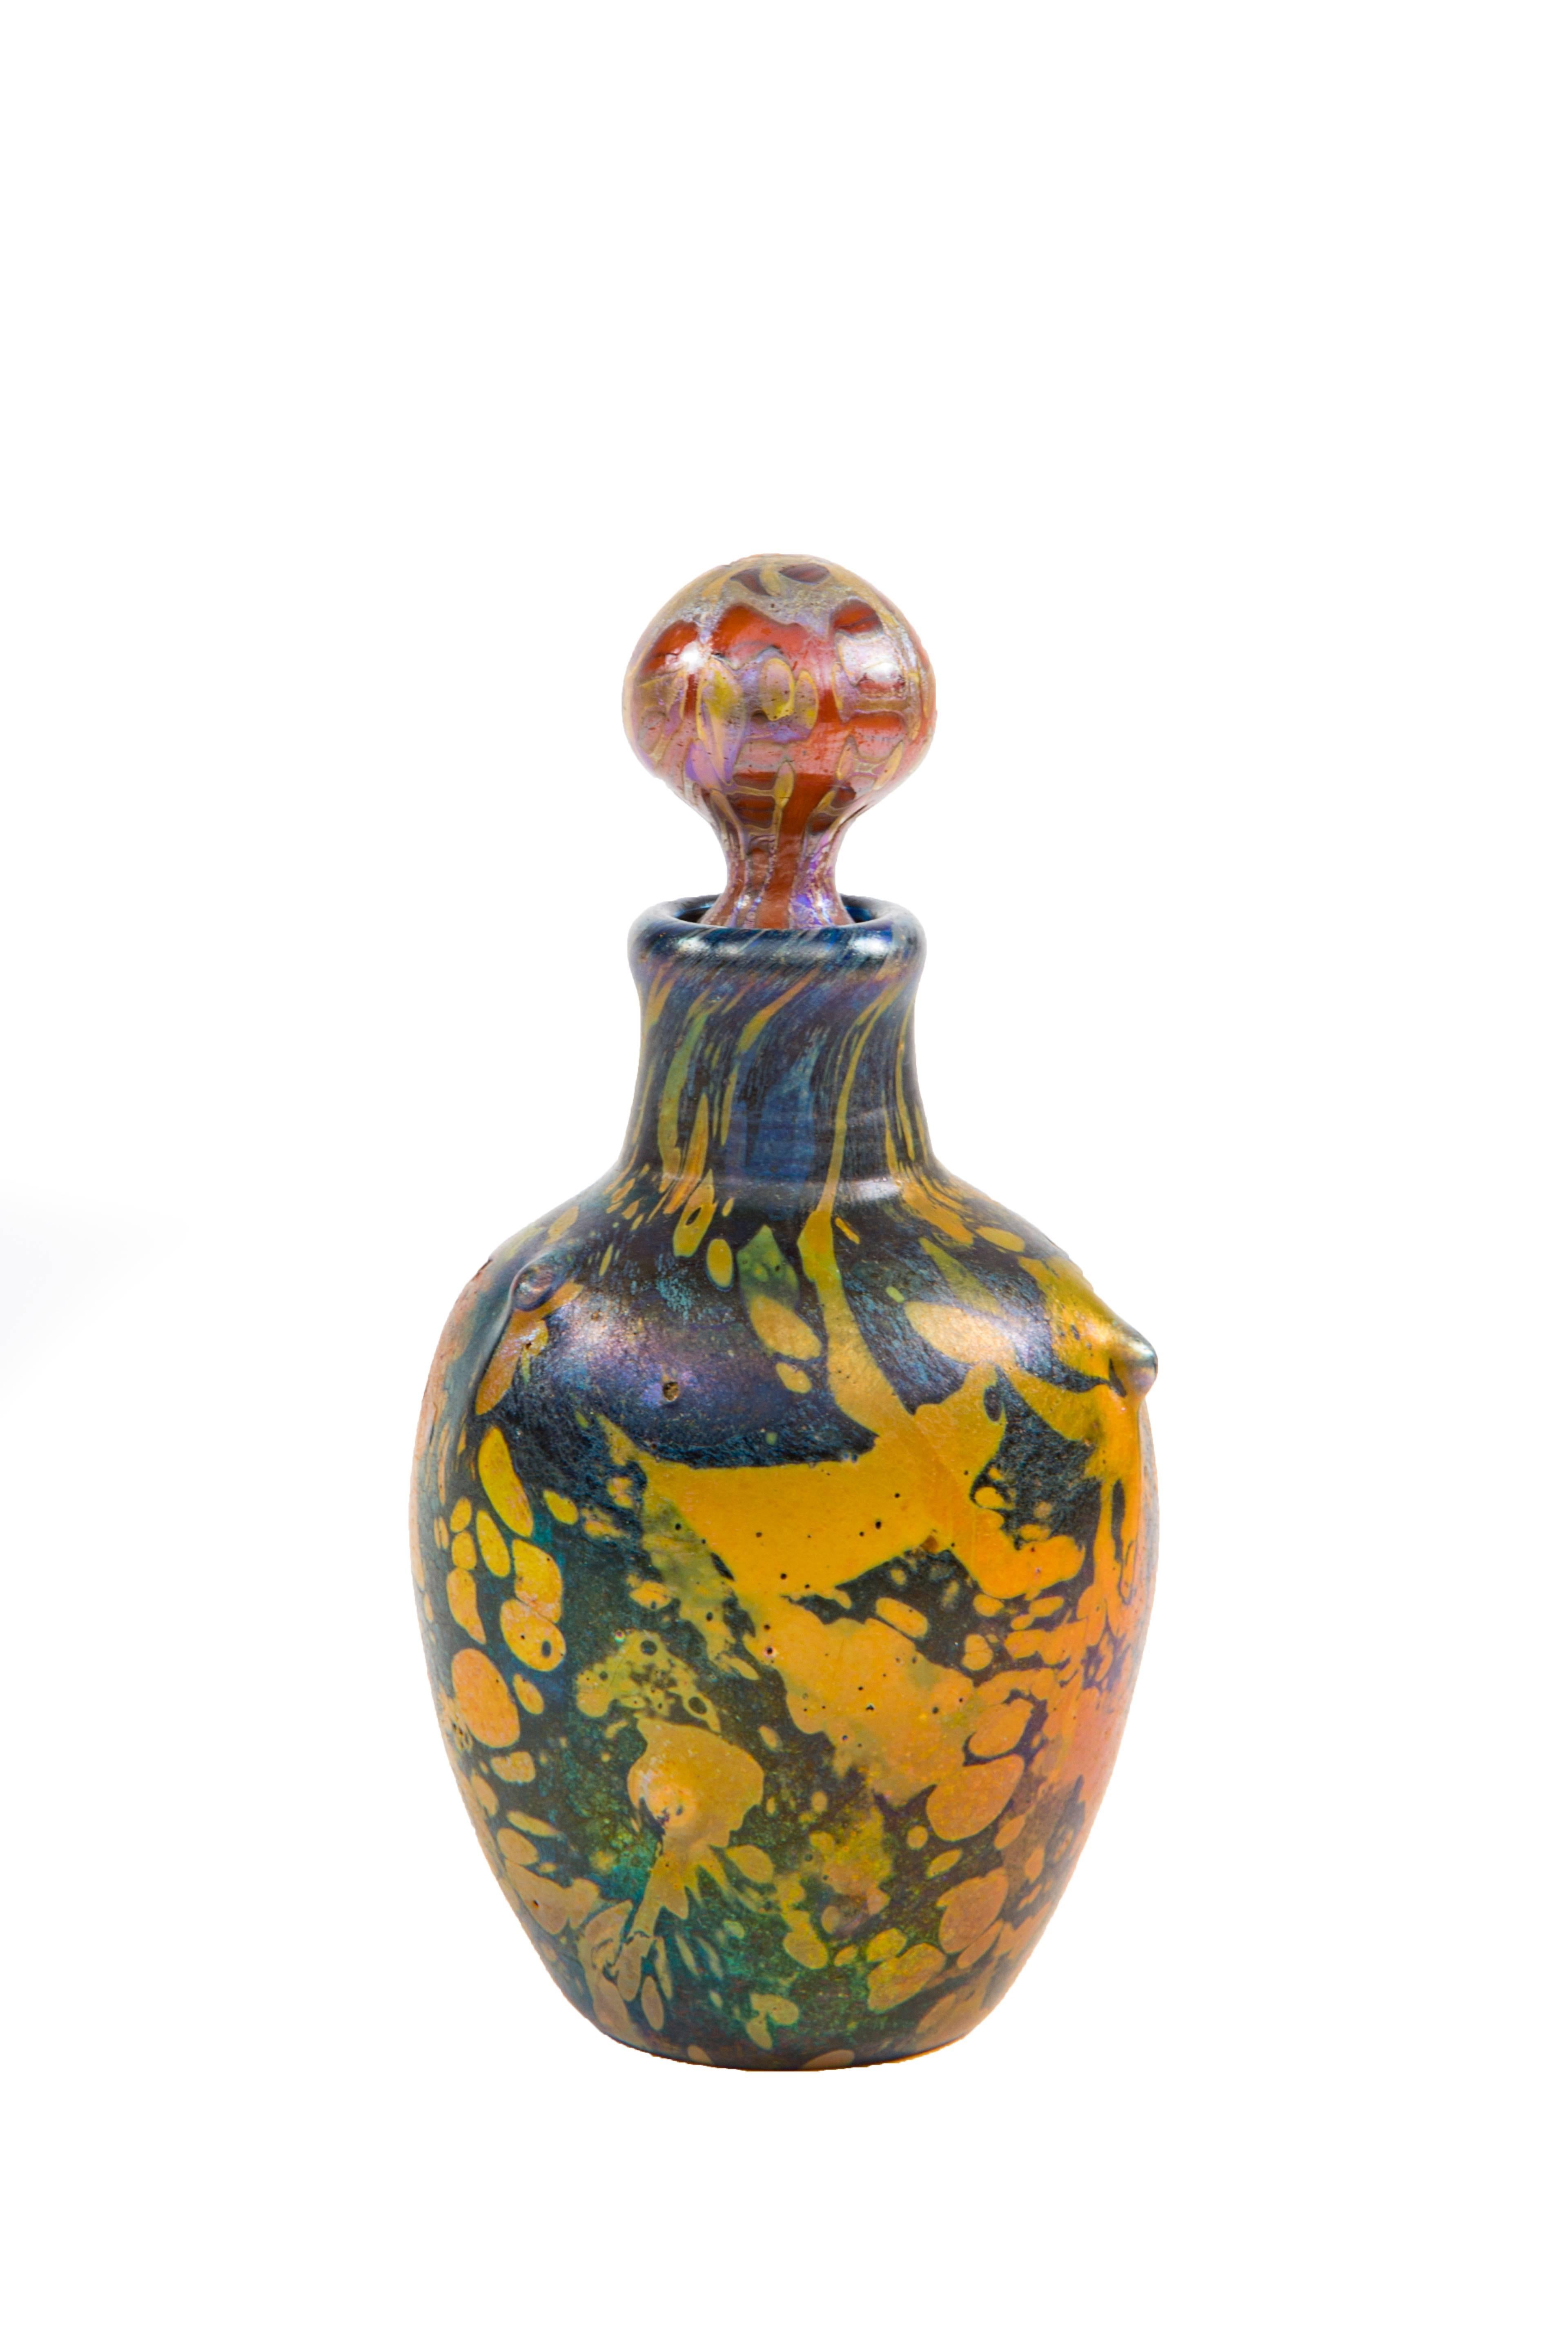 Other Tiffany Favrile Cypriote Decorated Perfume Bottle by, Tiffany Studios